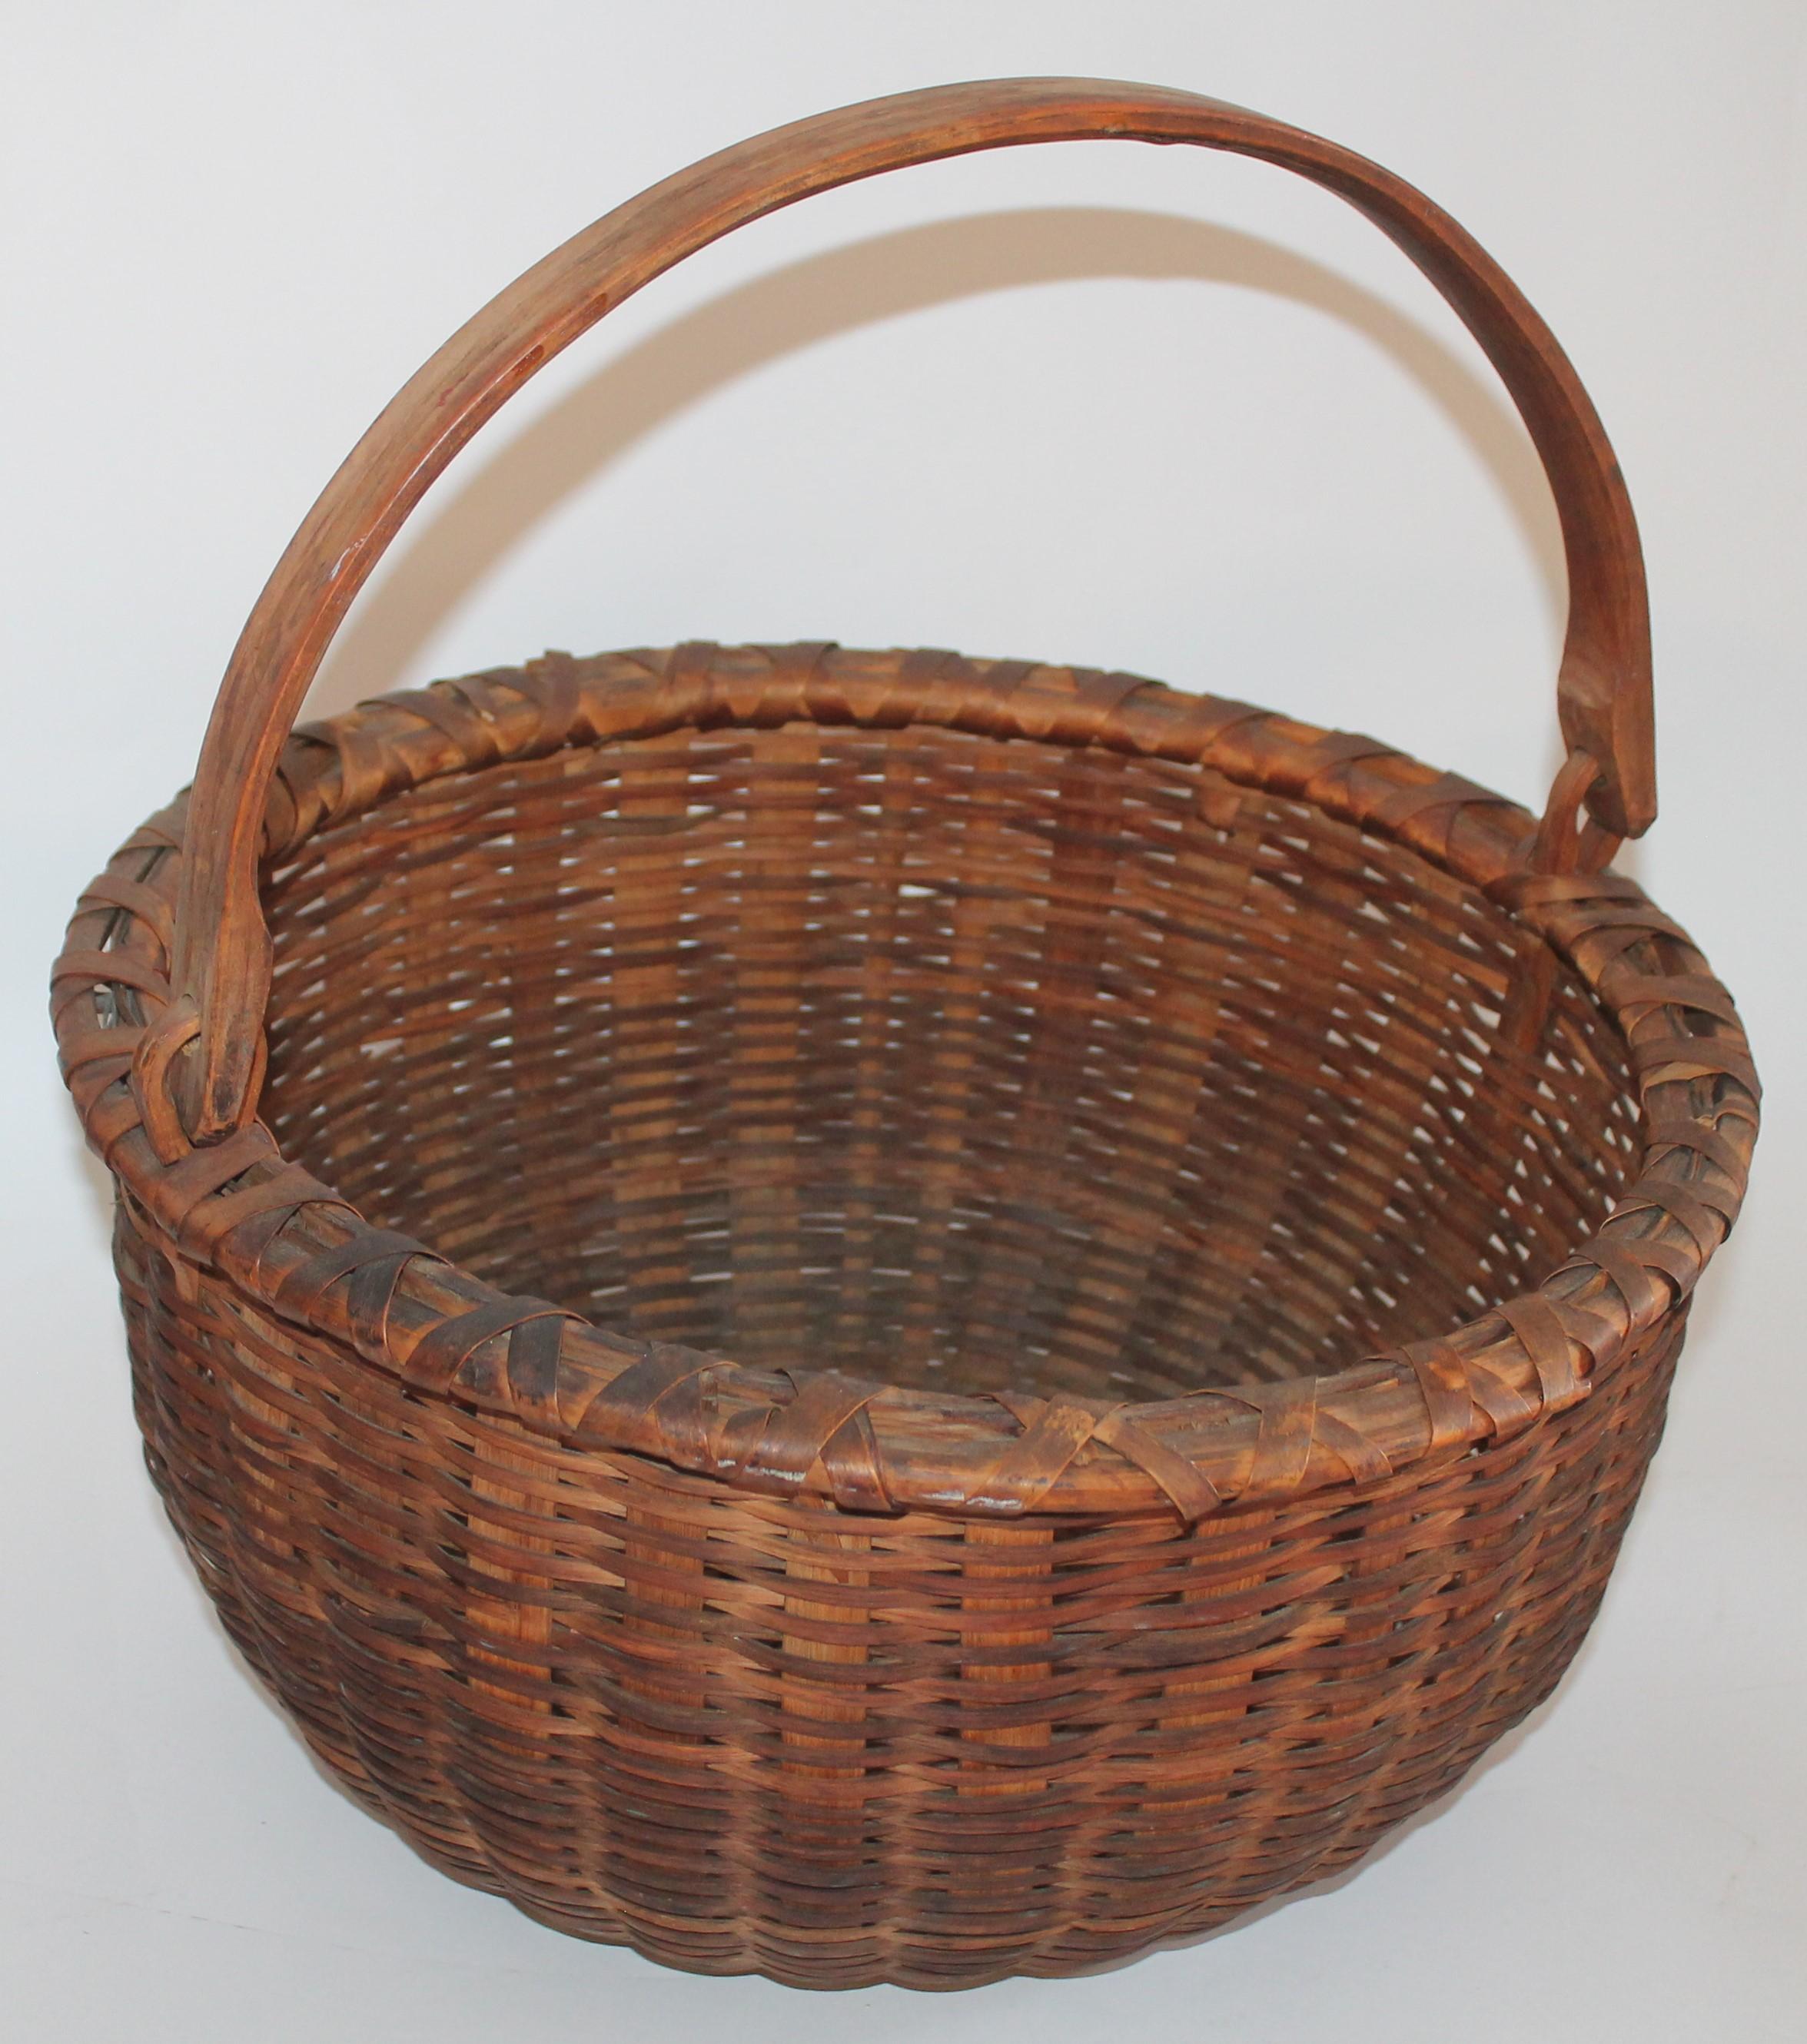 19th century Shaker Style swing handle basket in Fine condition with a nice aged patina.